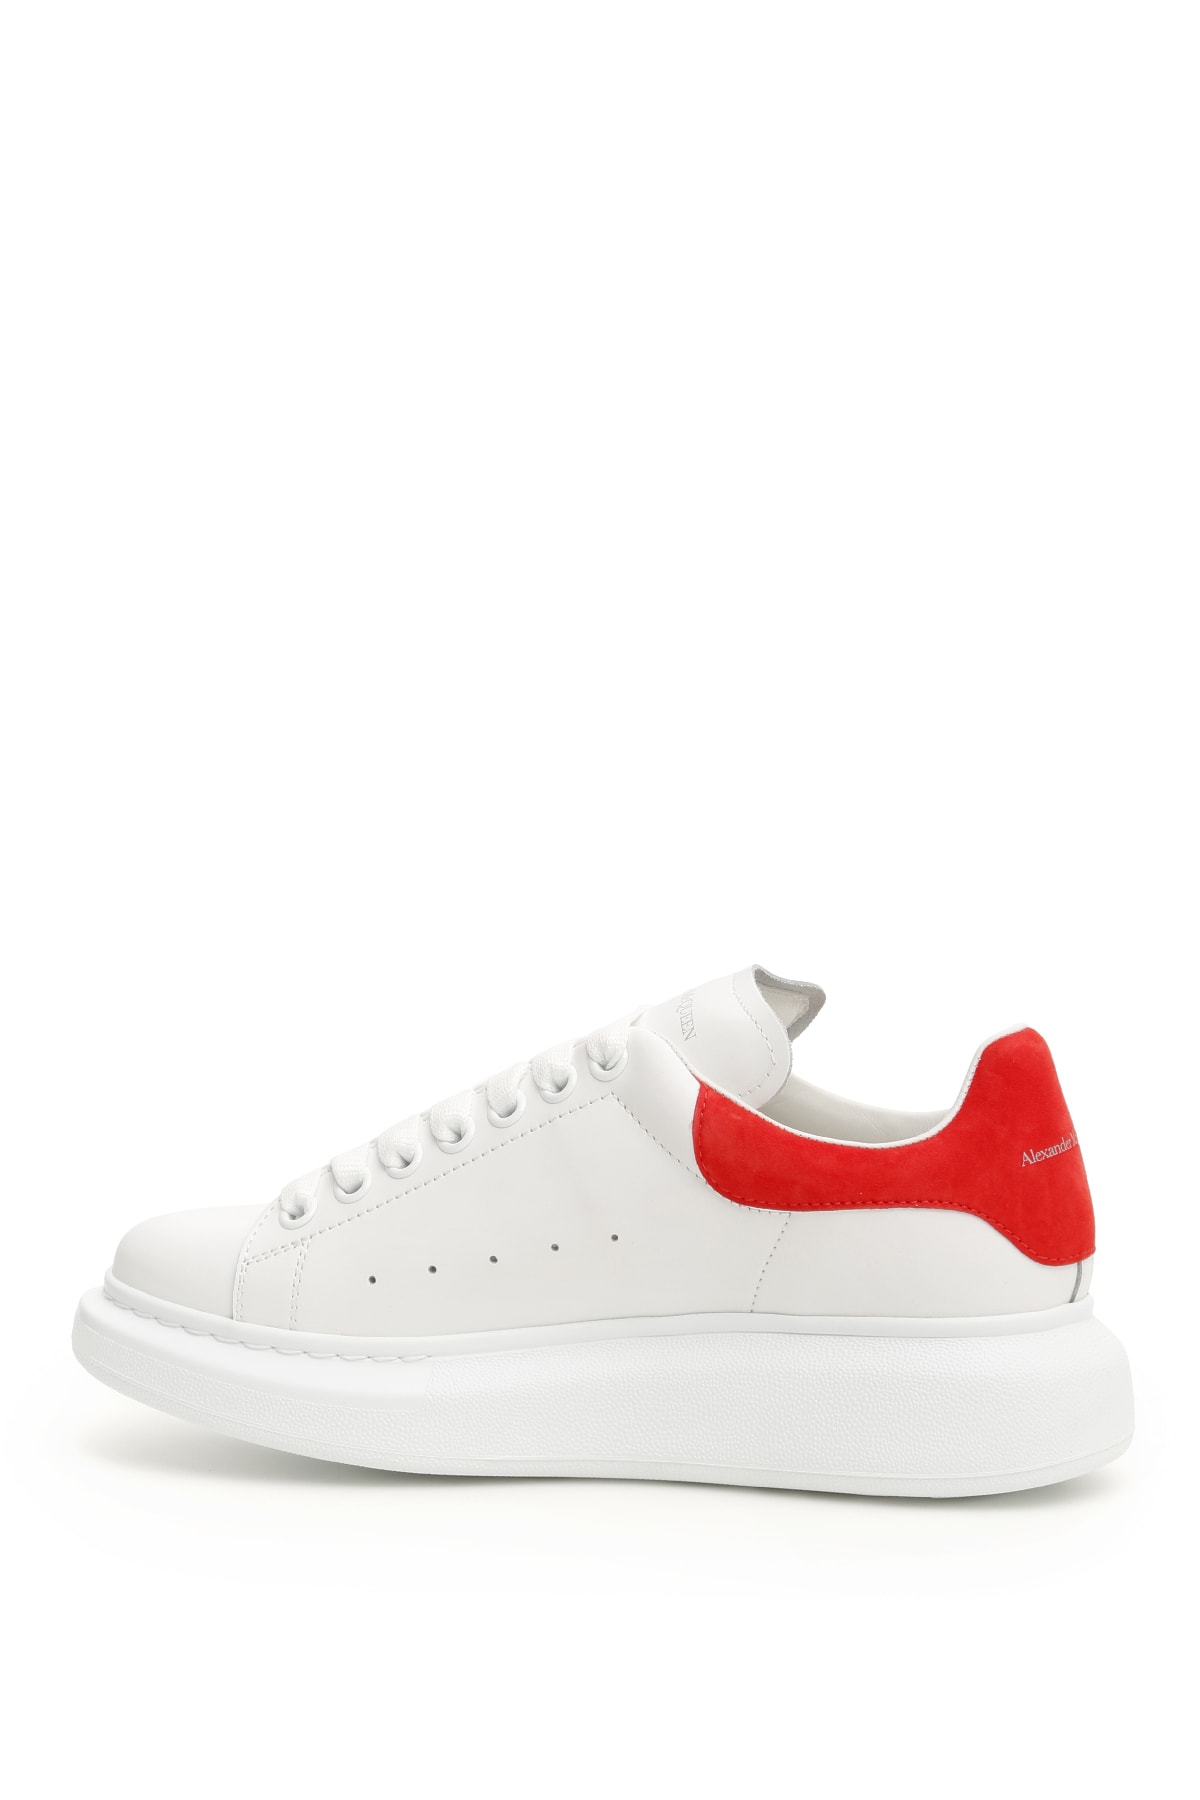 alexander mcqueen red and white